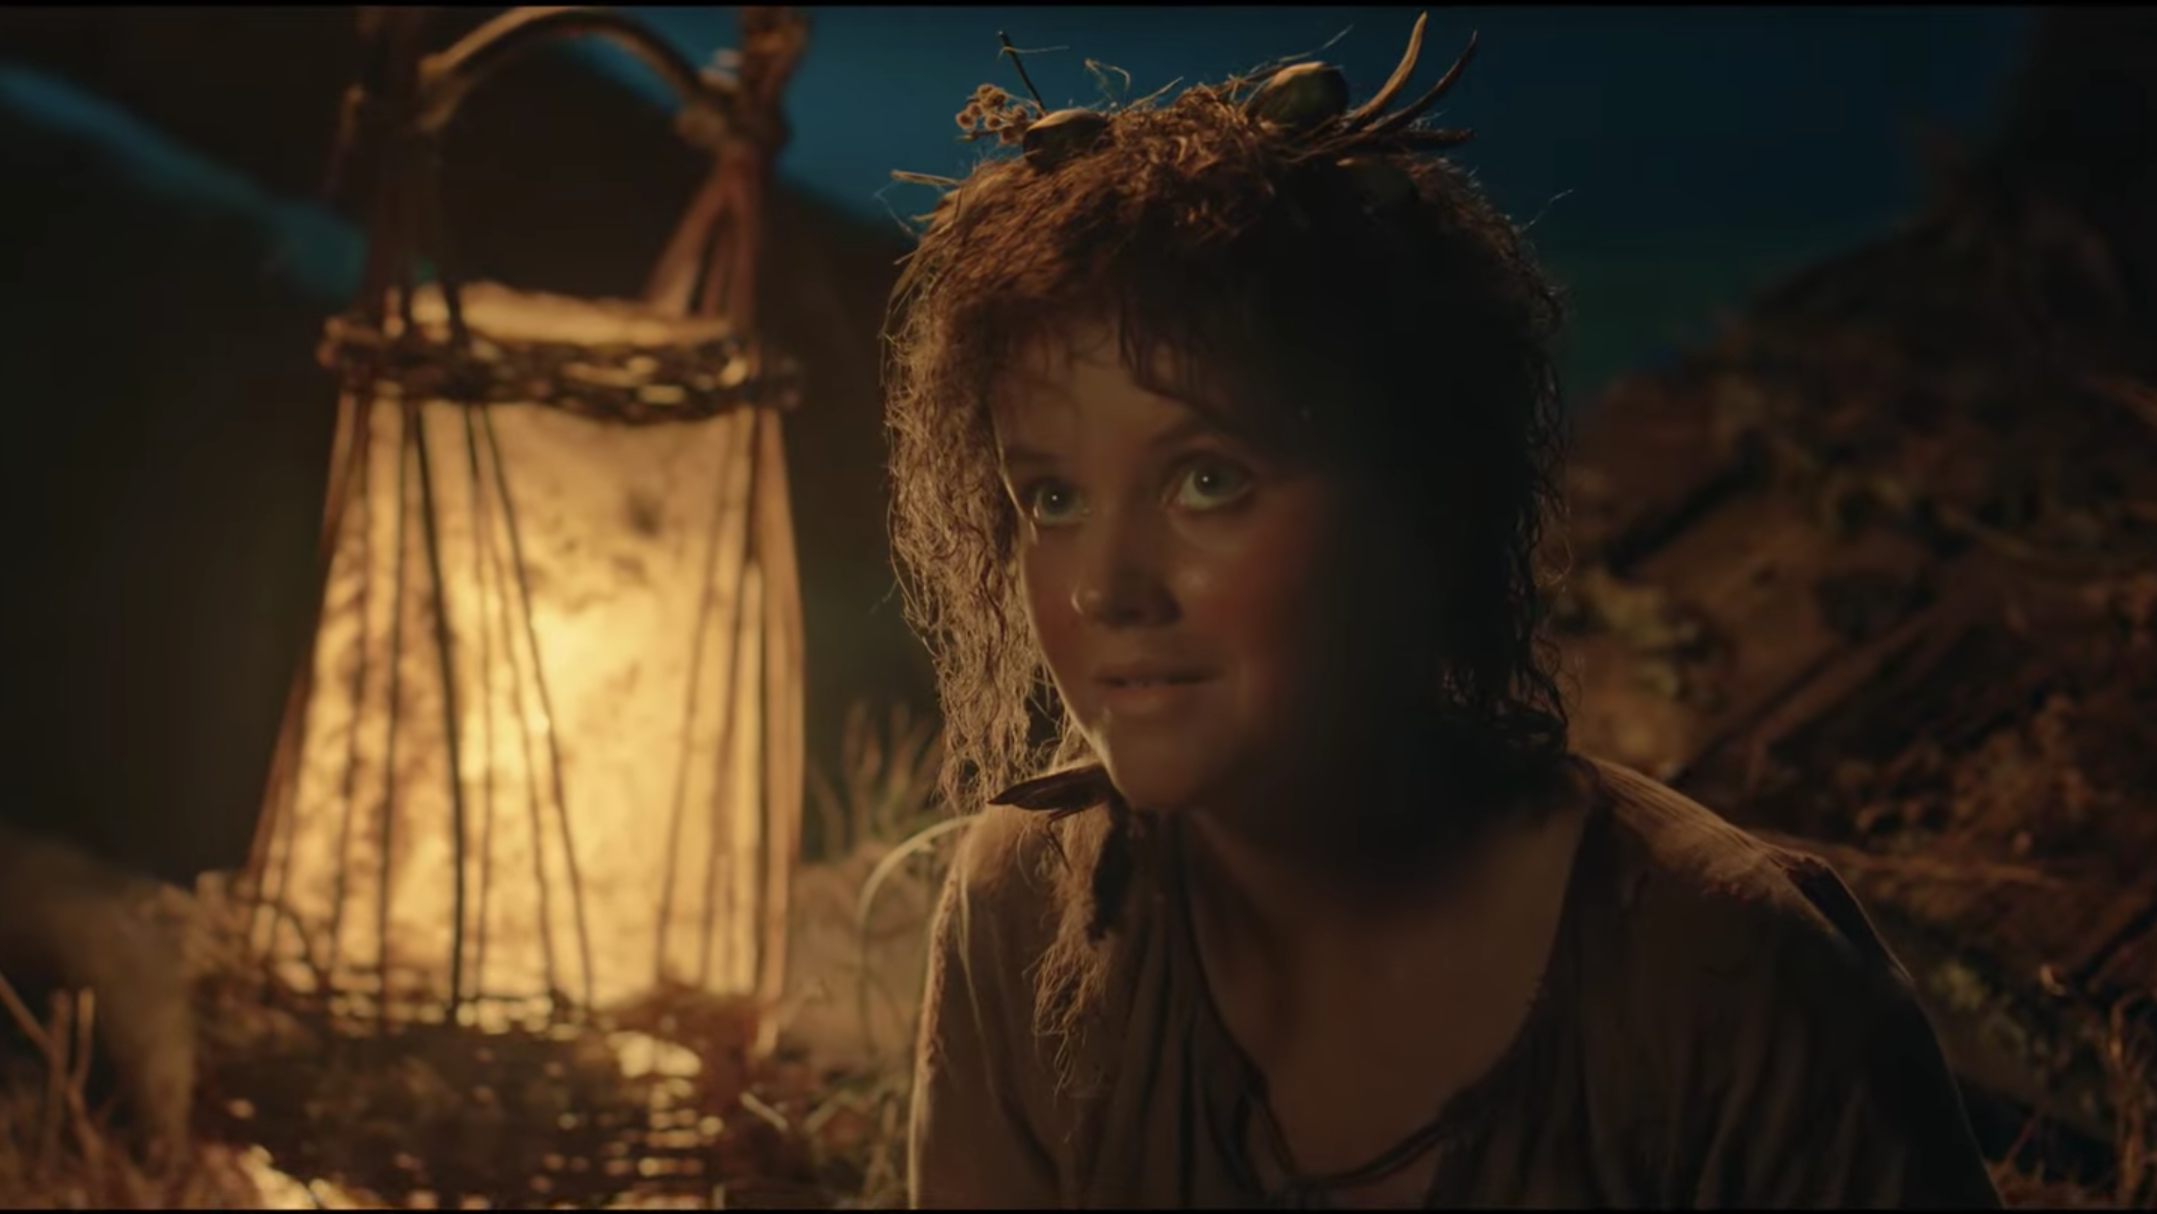 Here it is: Prime Video’s precious Lord Of The Rings trailer